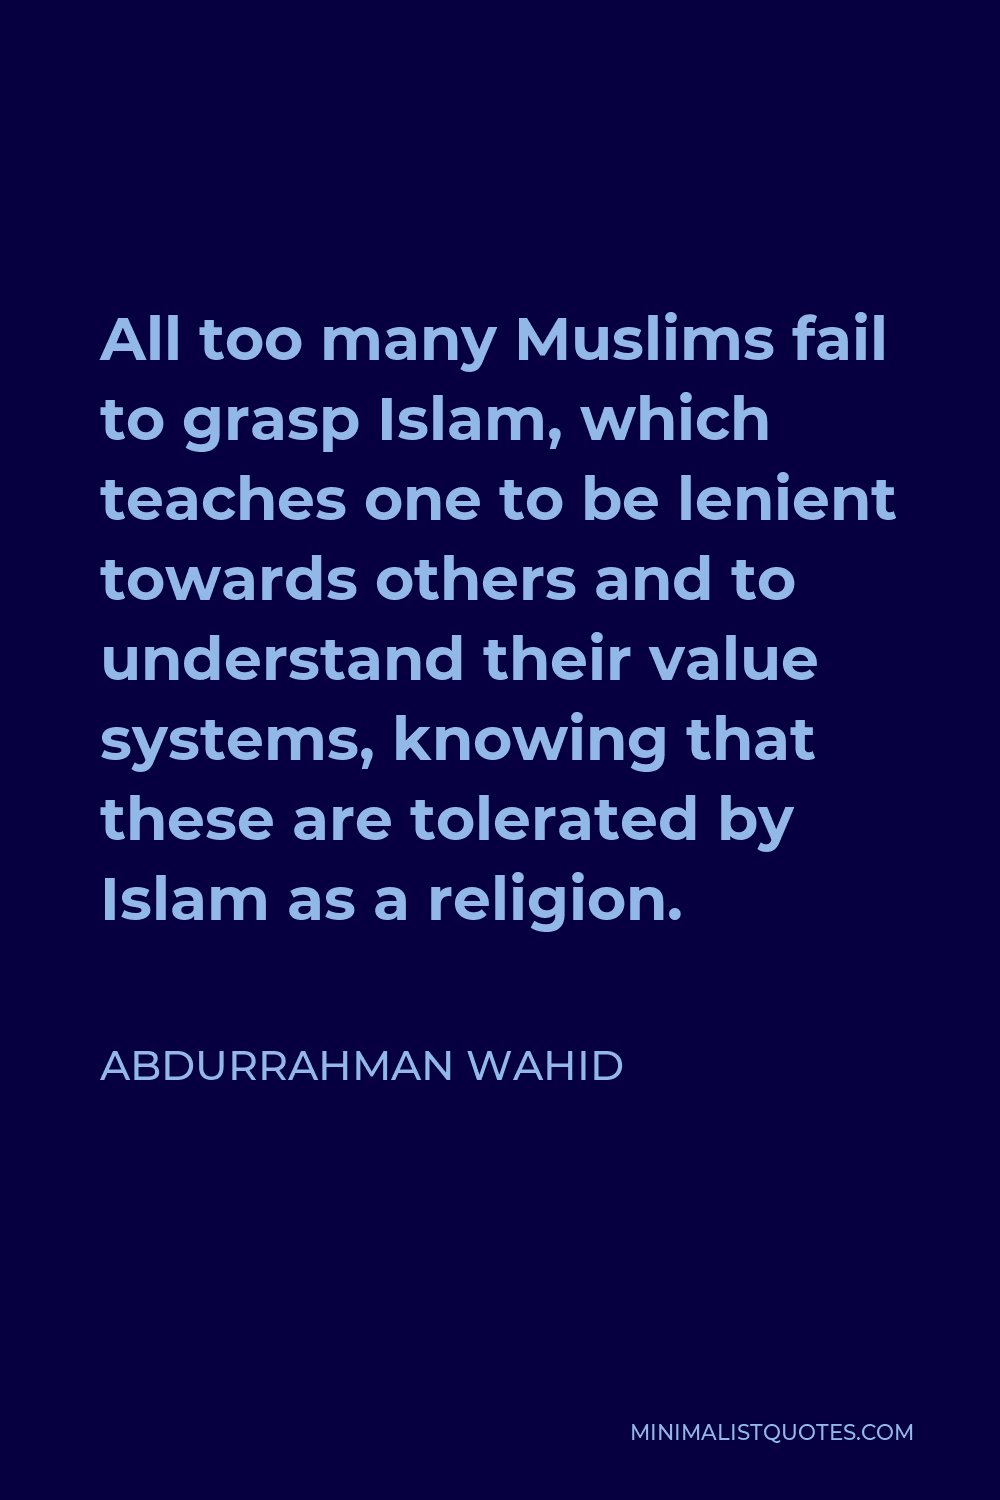 Abdurrahman Wahid Quote - All too many Muslims fail to grasp Islam, which teaches one to be lenient towards others and to understand their value systems, knowing that these are tolerated by Islam as a religion.